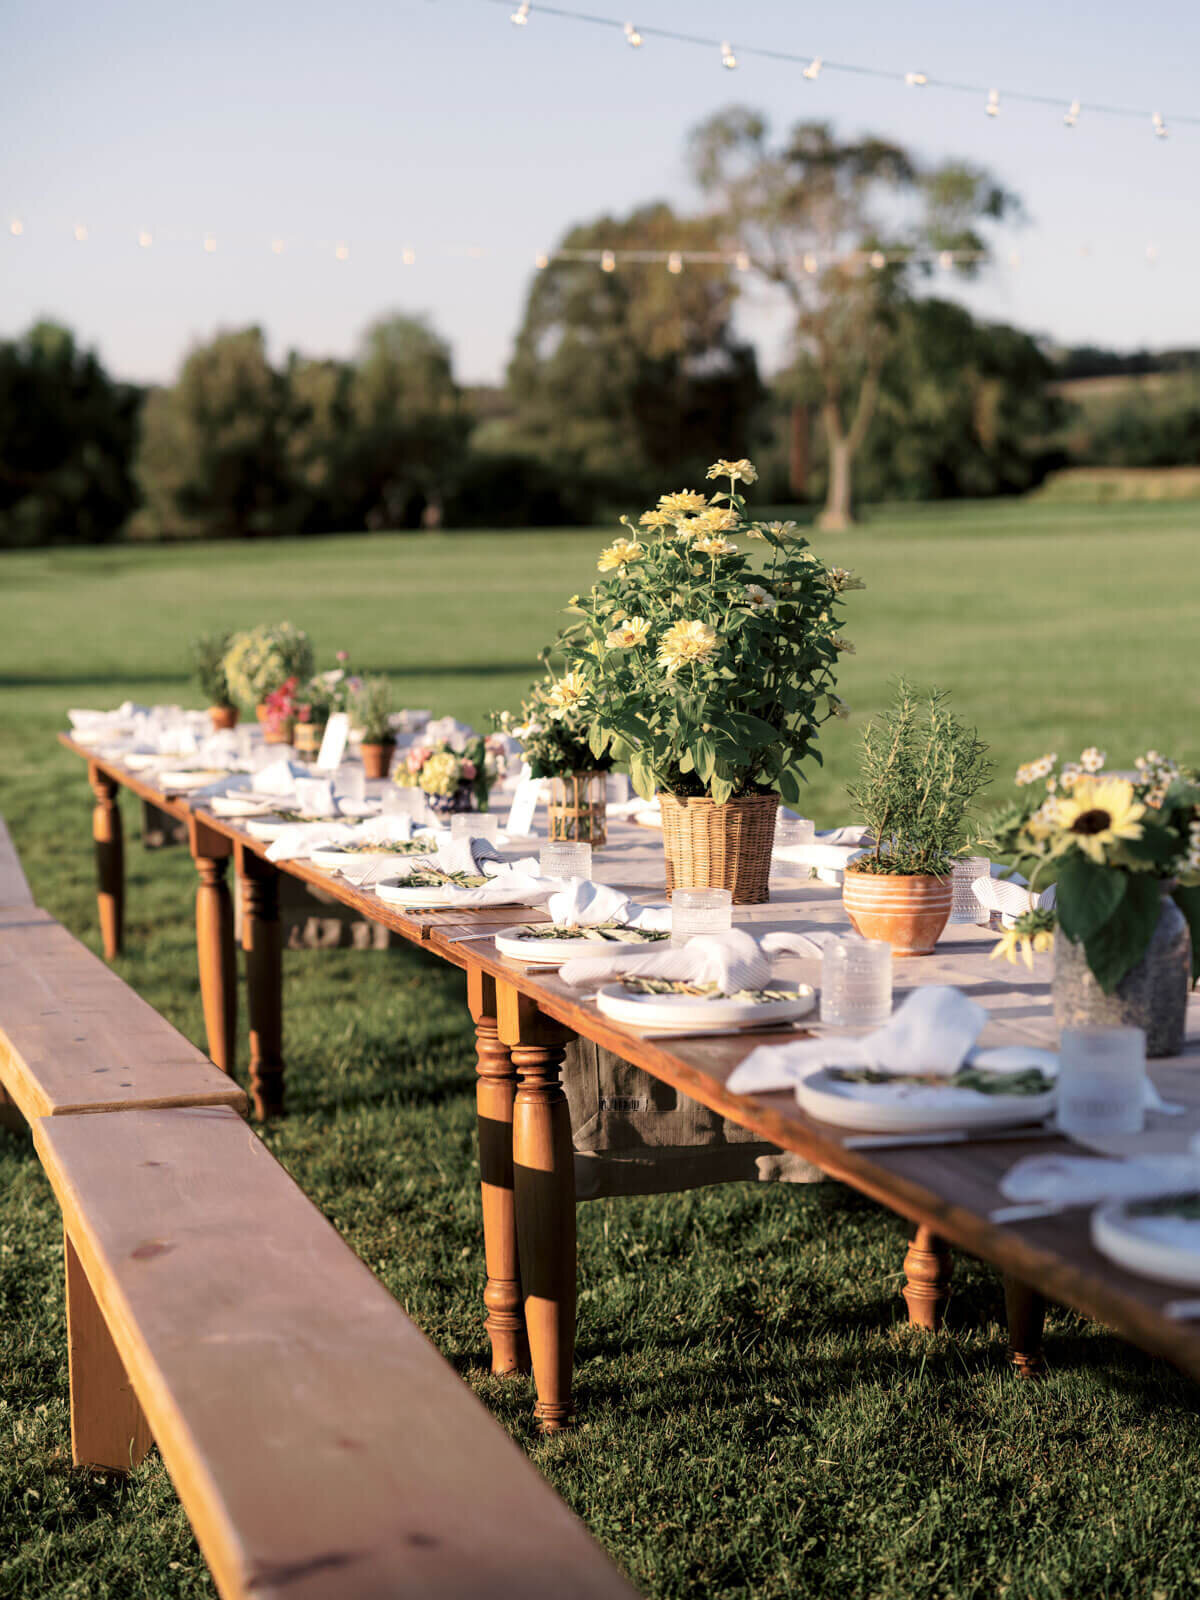 A rustic and pretty dining set-up outdoors, with lovely flower centerpieces, at Lion Rock Farms, CT. Image by Jenny Fu Studio